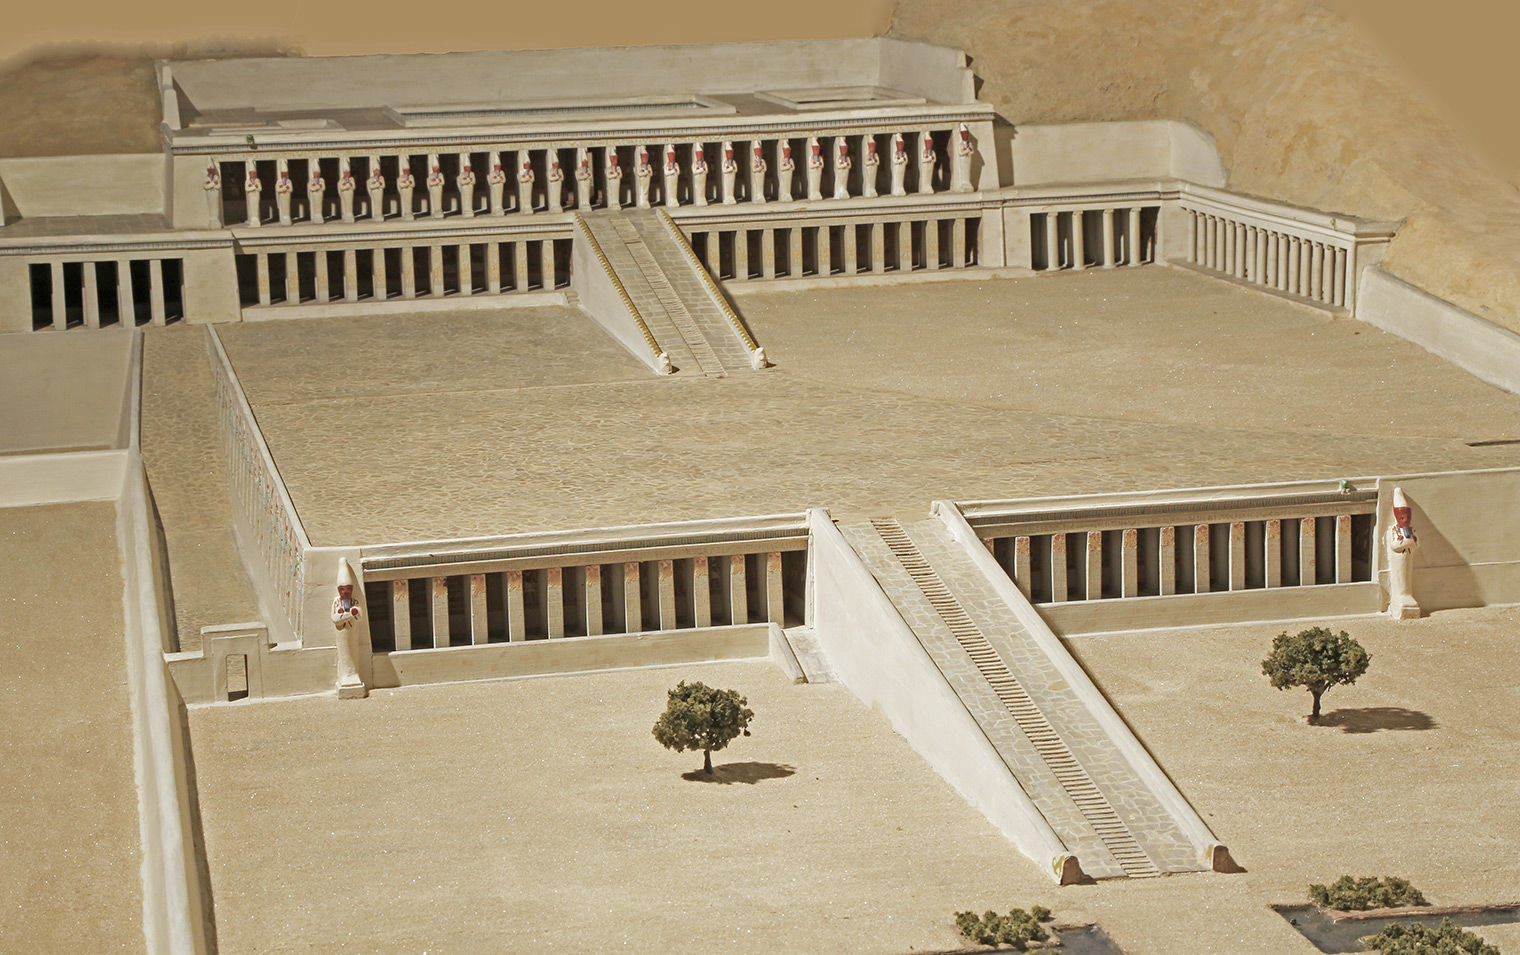 Terraced temple with ramps, all beige in a sandy landscape, with mummiform statues on the main levels.